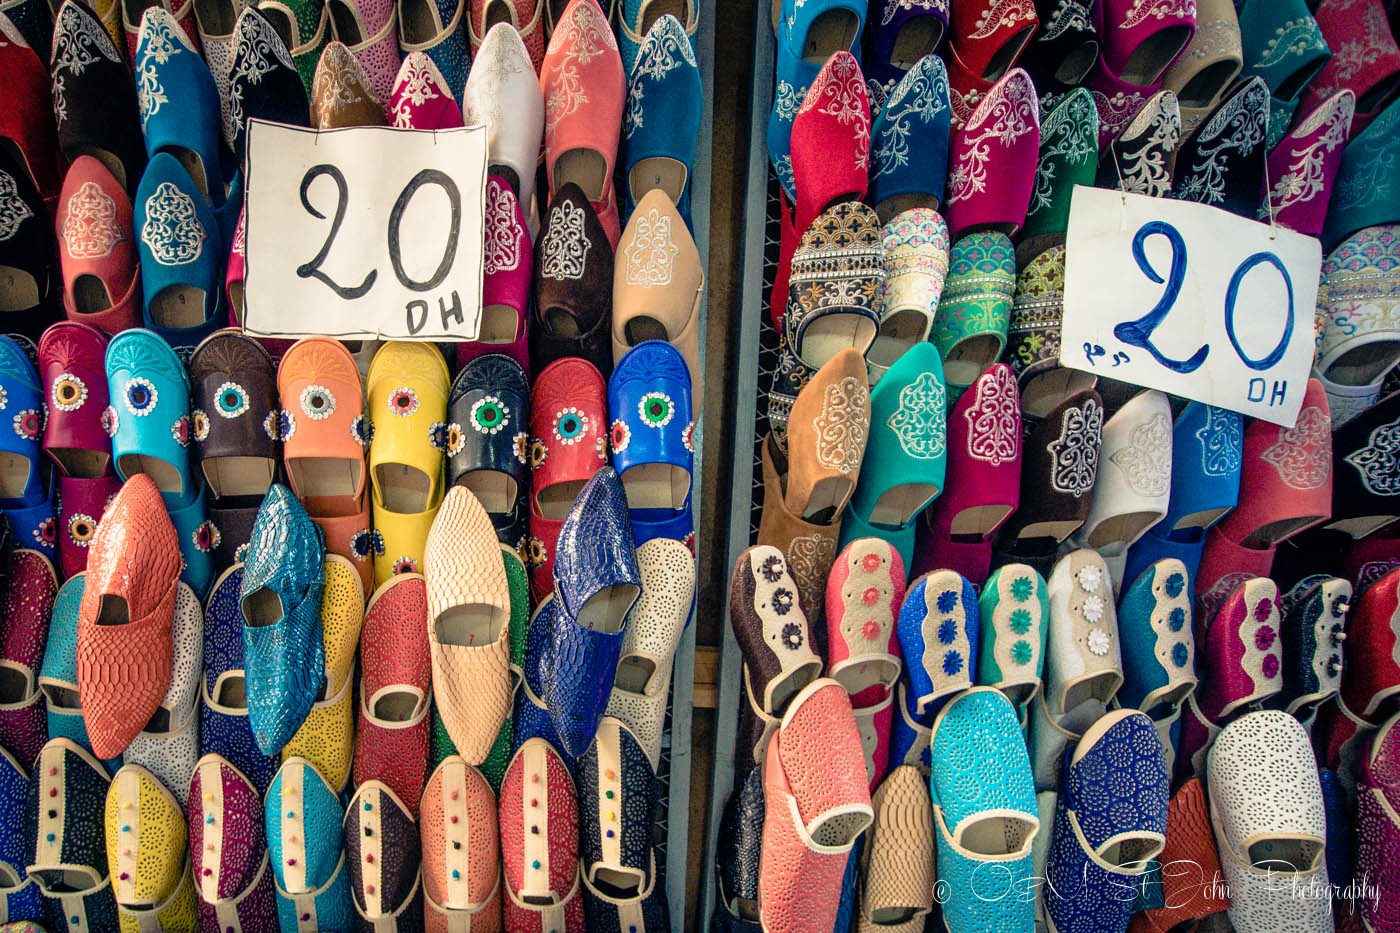 Traditional Moroccan shoes on sale in Fes, Morocco